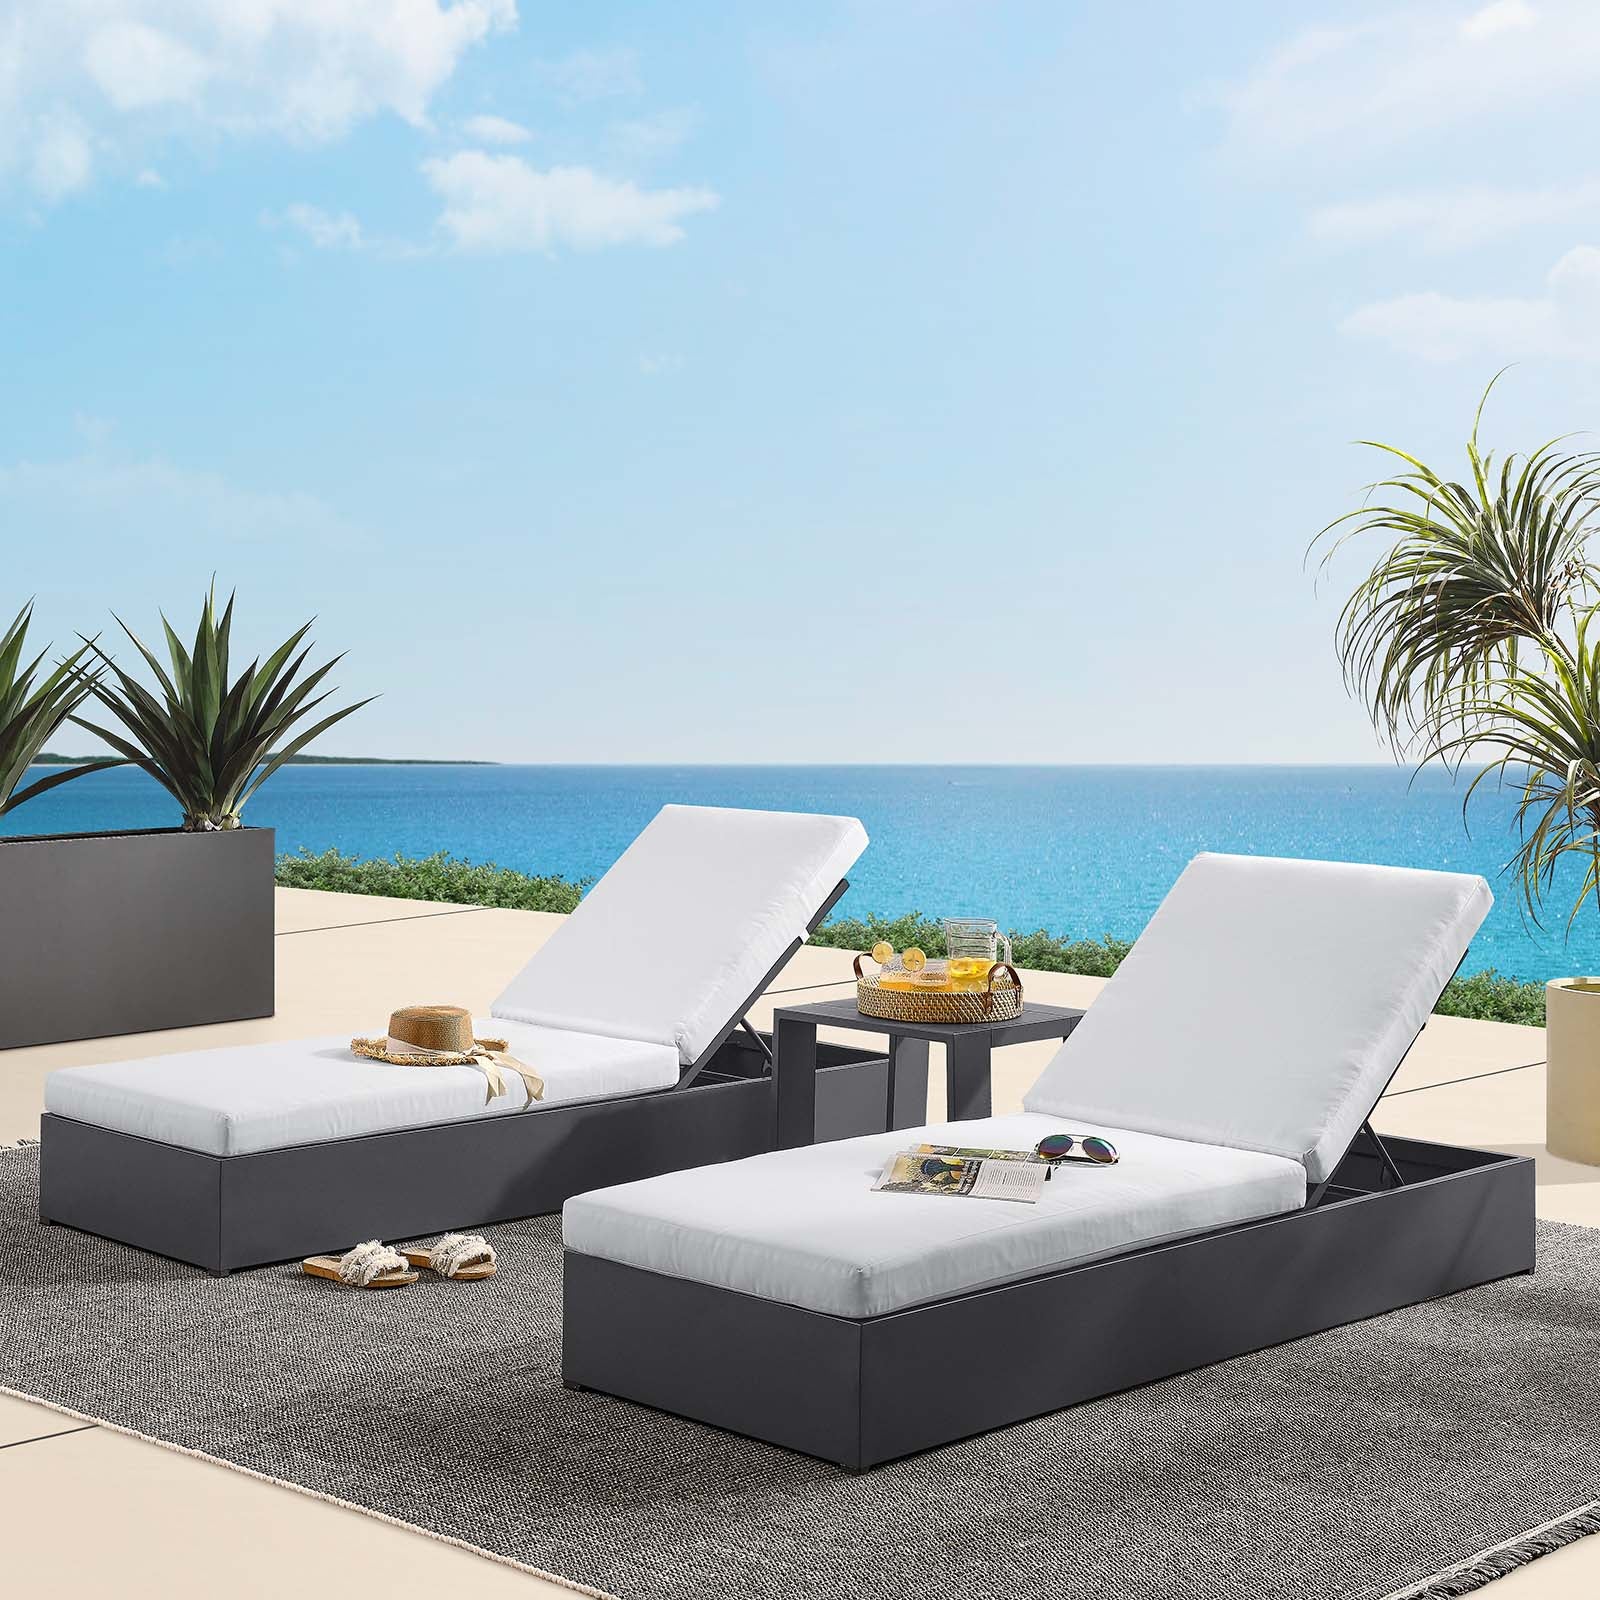 Tahoe Outdoor Patio Powder-Coated Aluminum 3-Piece Chaise Lounge Set - East Shore Modern Home Furnishings